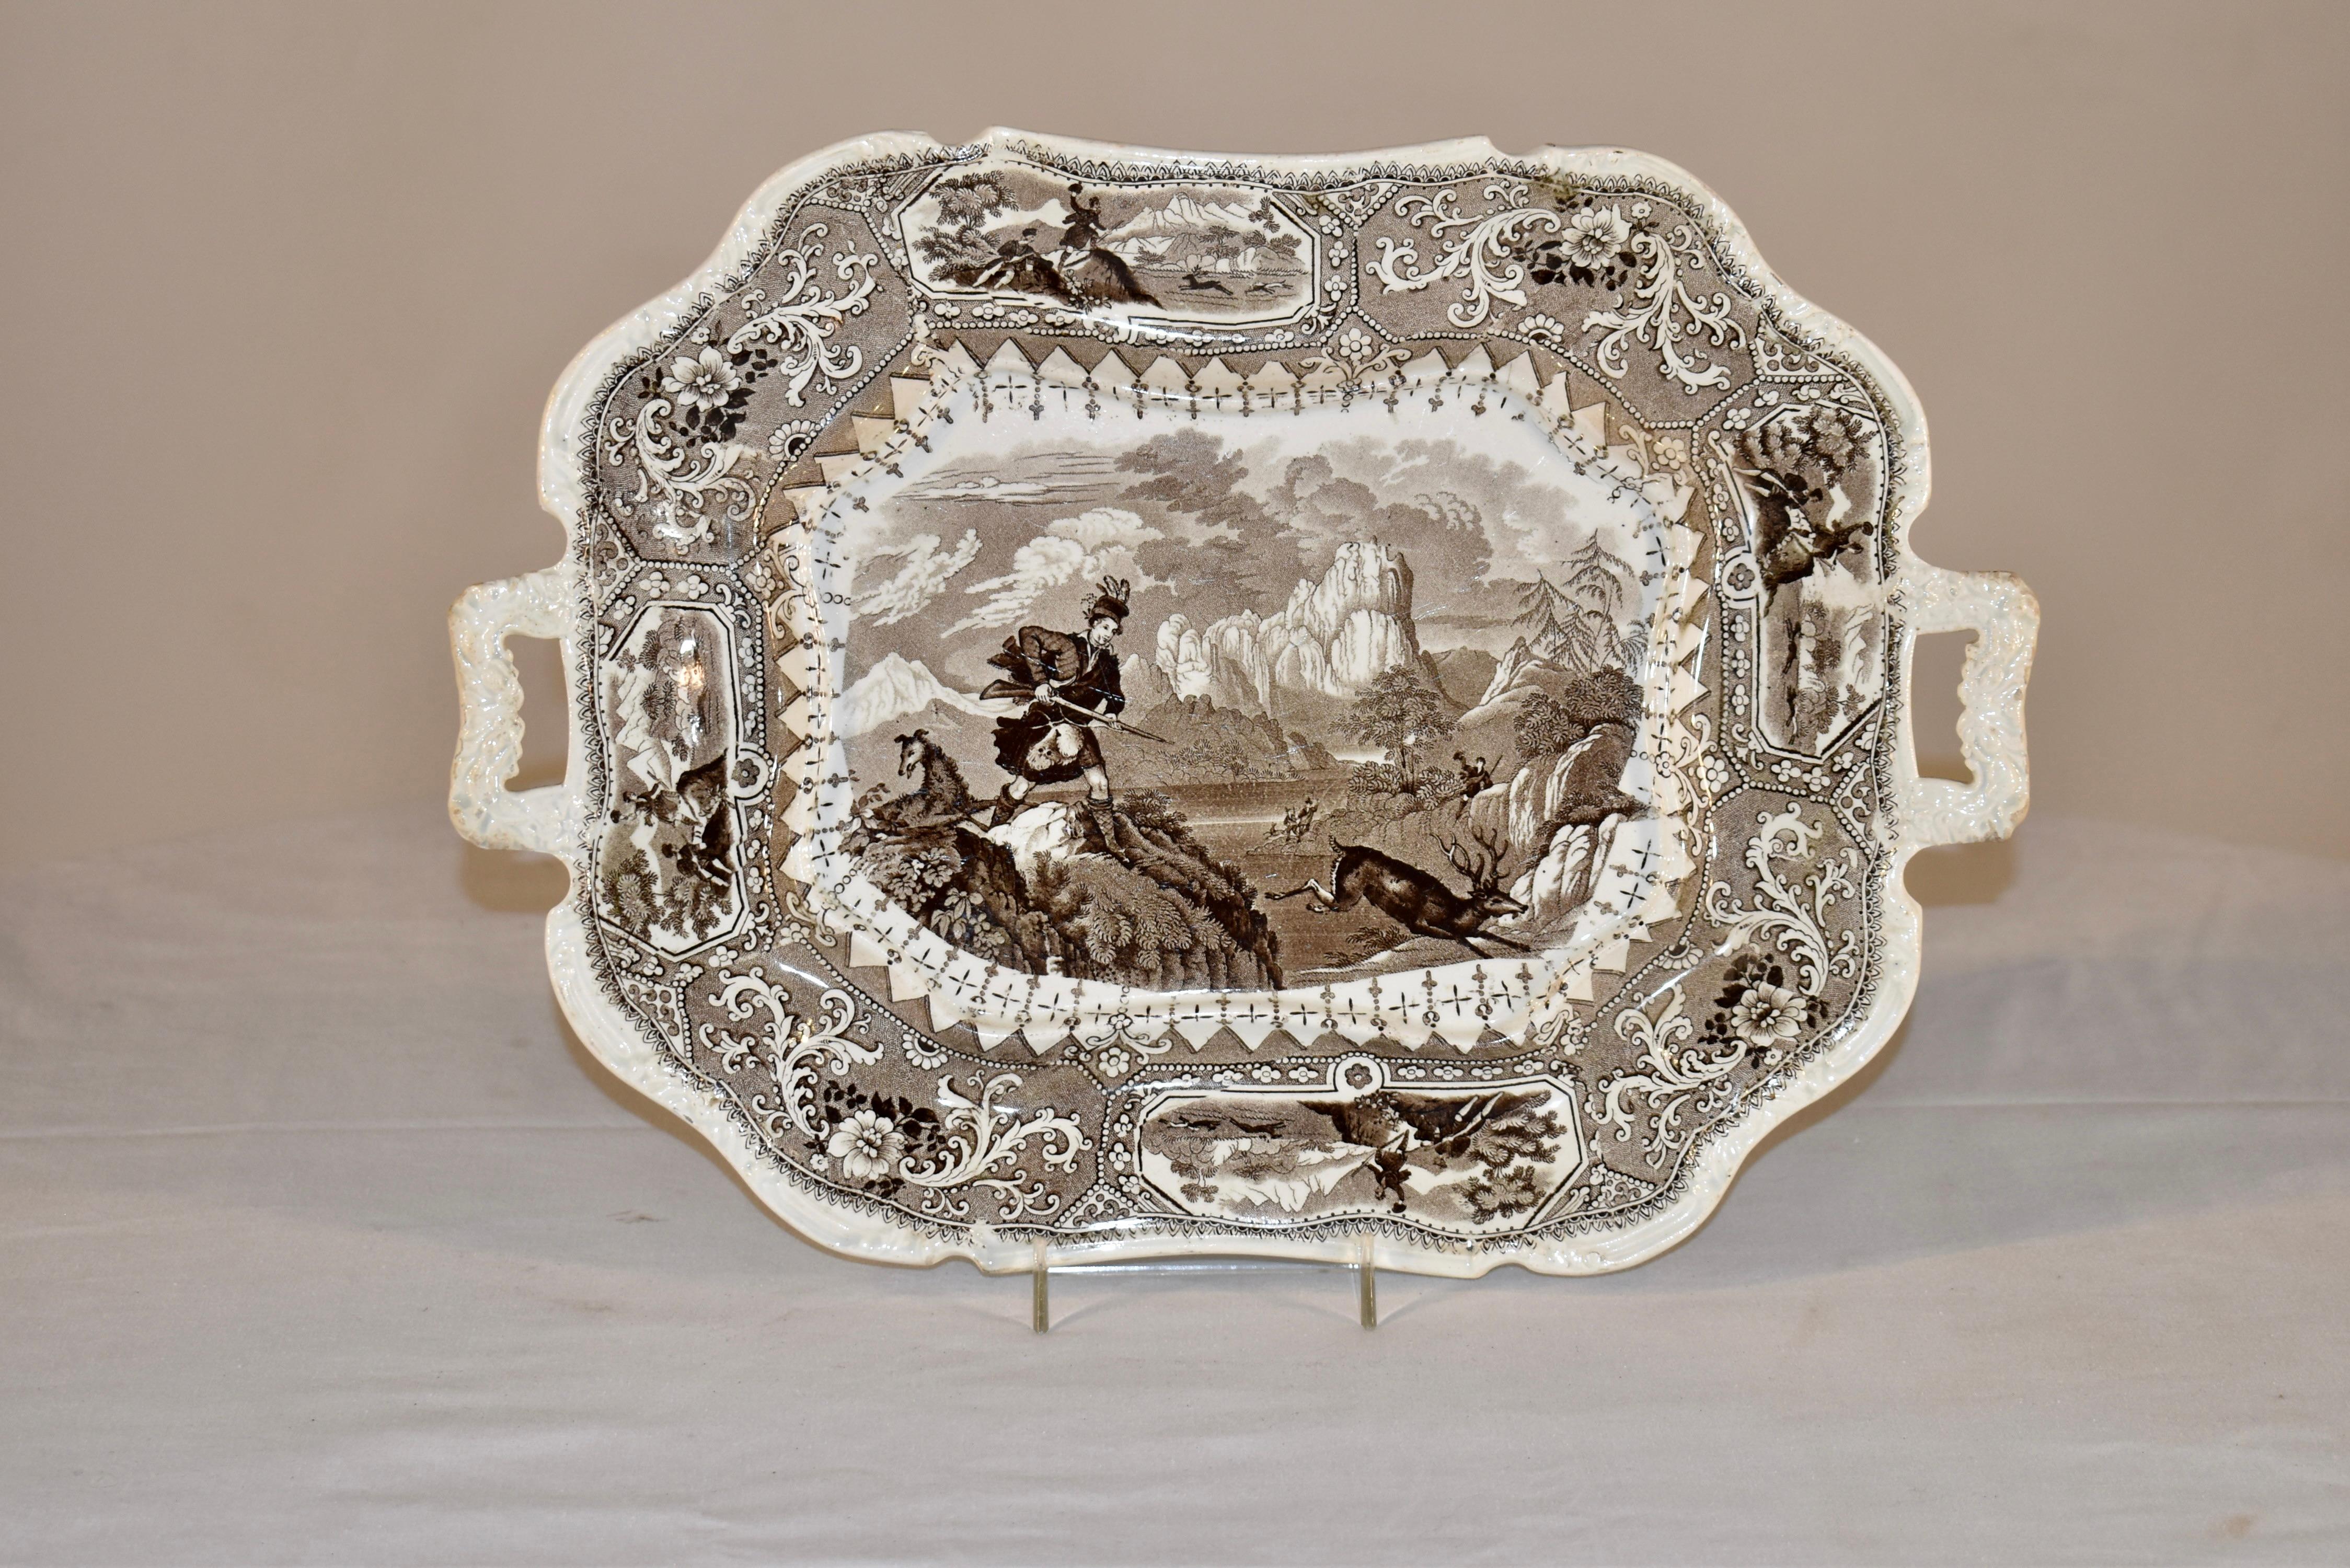 Early 19th century handled large plate in the famous 